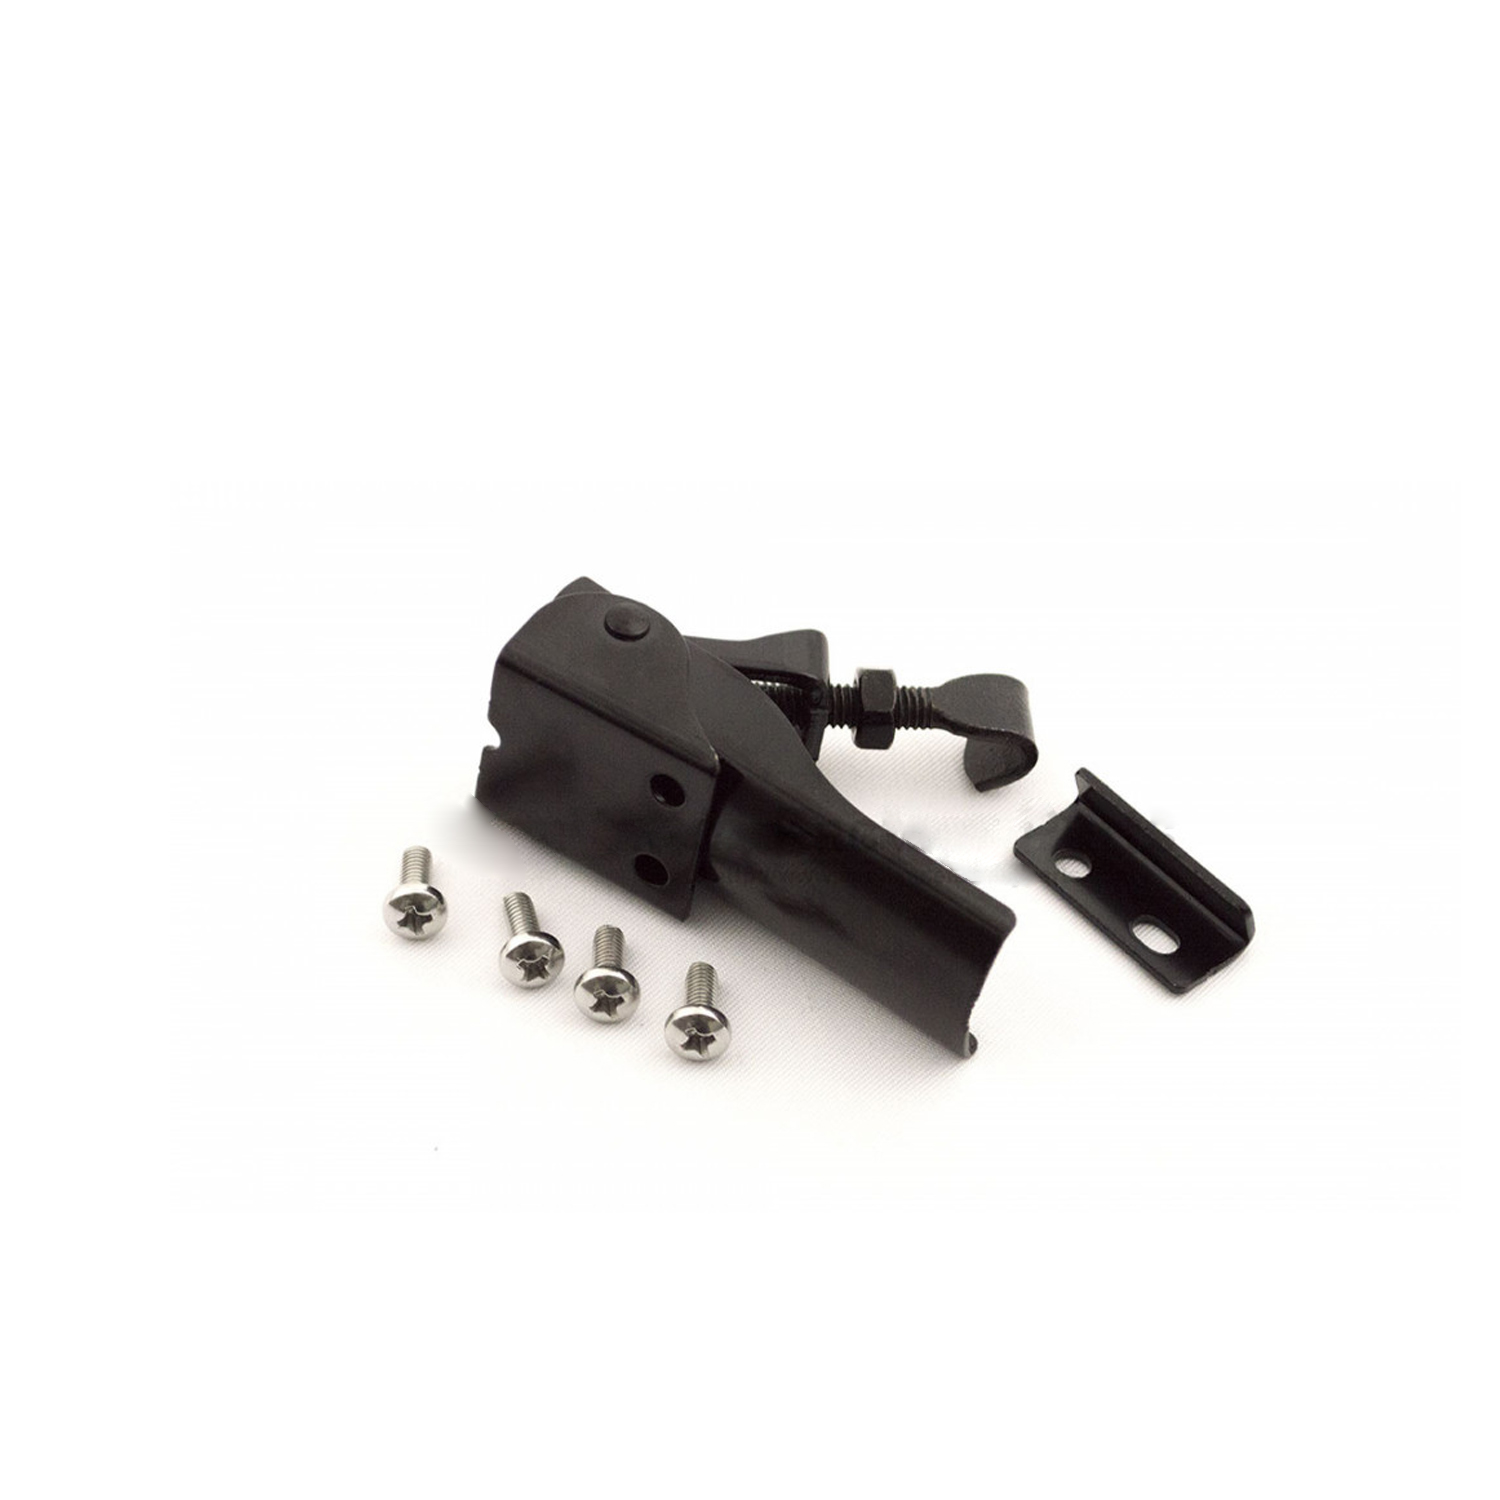 Door Latch Kit for Masterbuilt Electric Smokers-YAOAWE